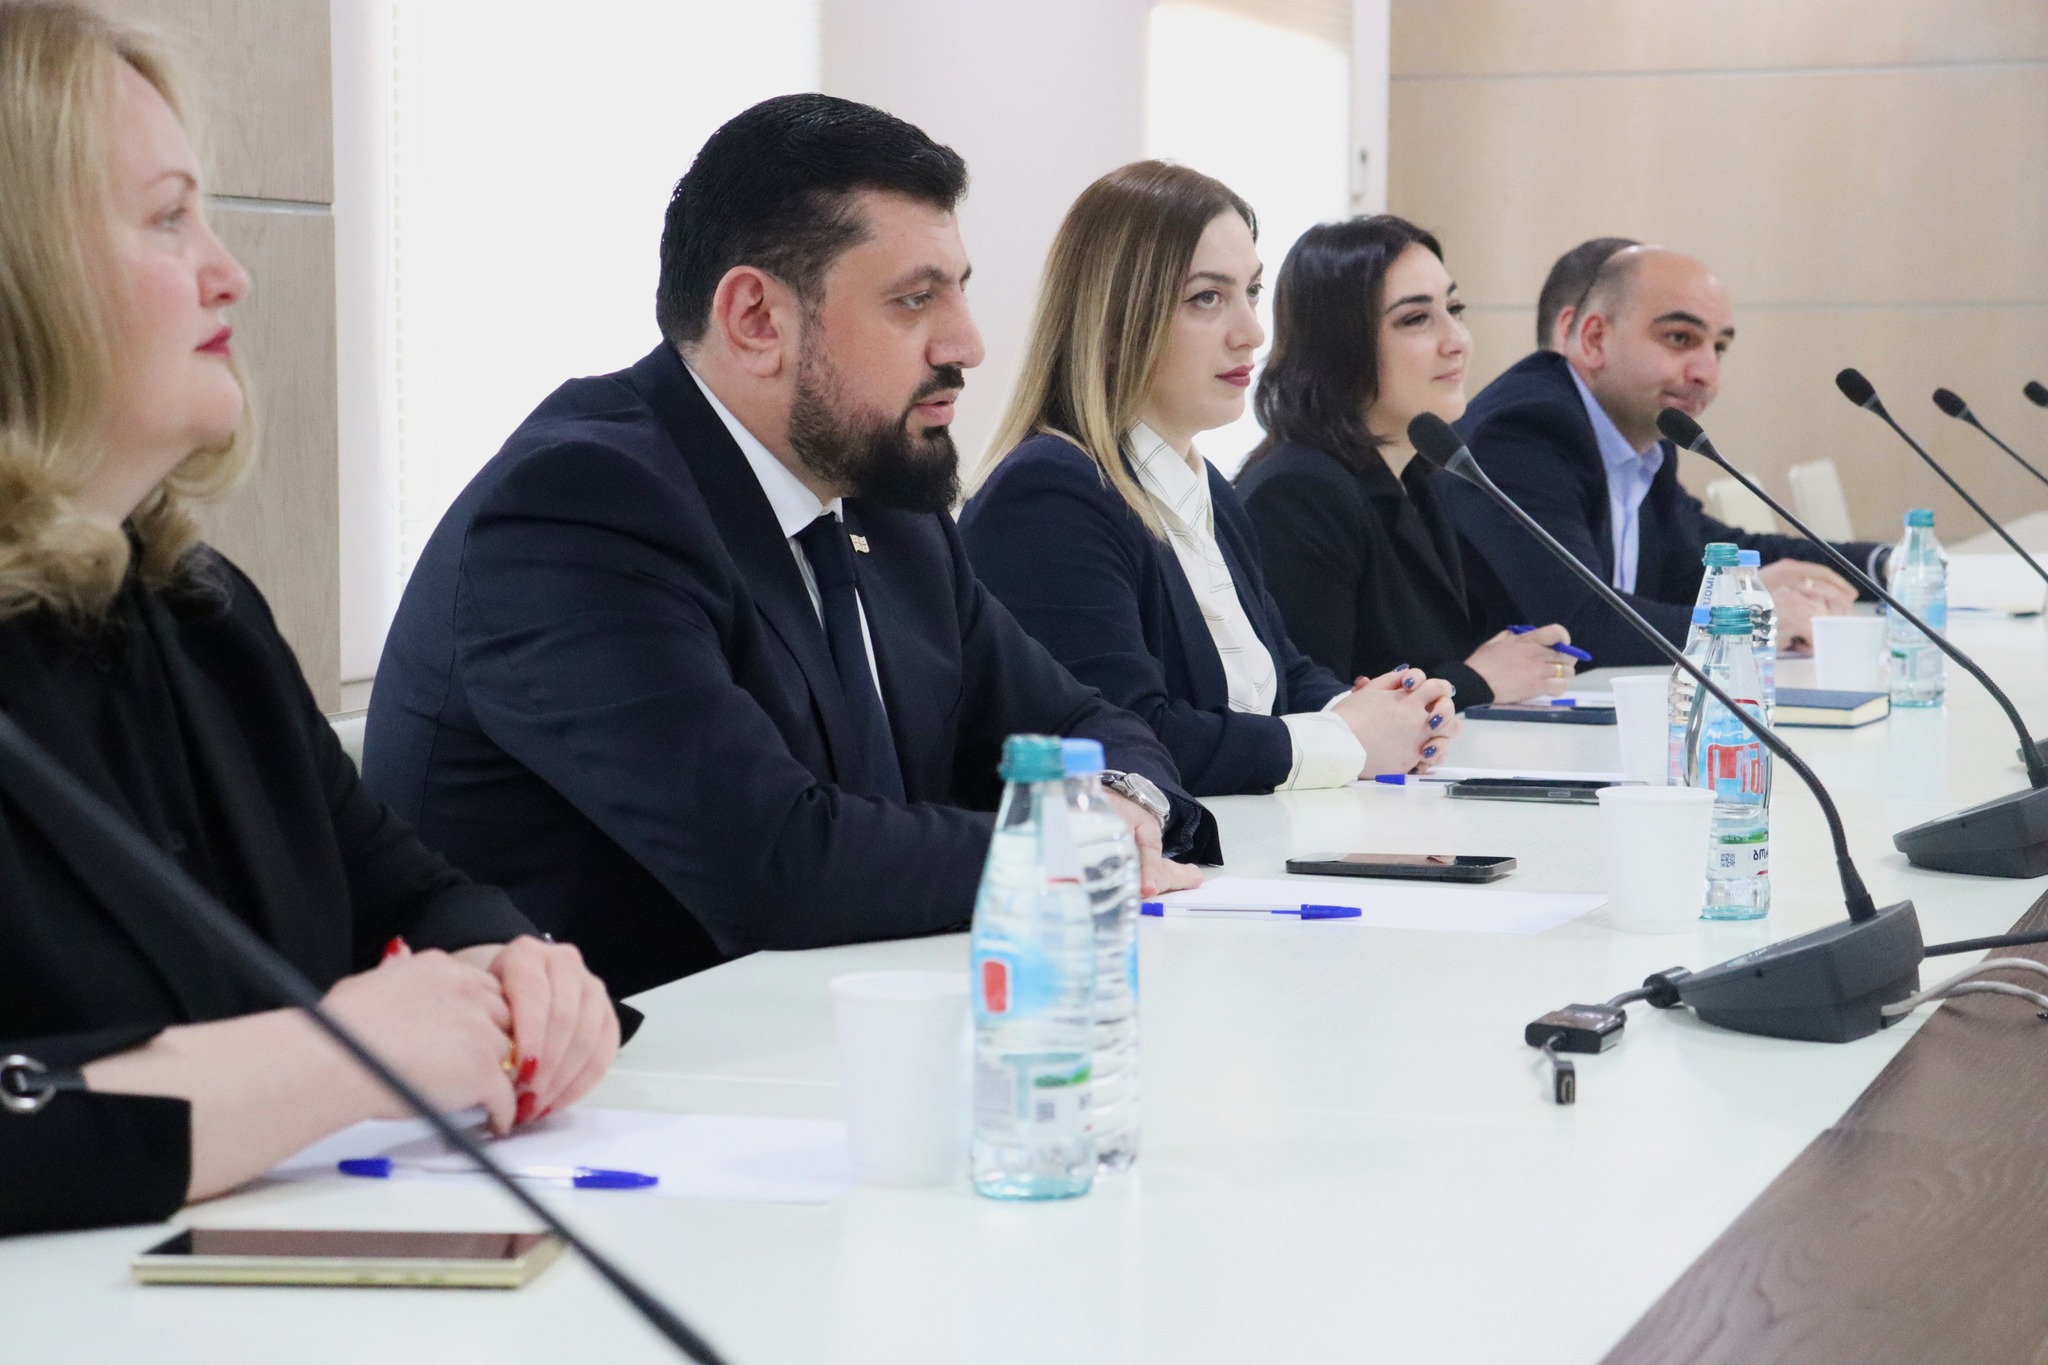 The Head of the Anti-Corruption Bureau, Razden Kuprashvili, met with representatives from the Needs Assessment Mission of the OSCE Office for Democratic Institutions and Human Rights (ODIHR)